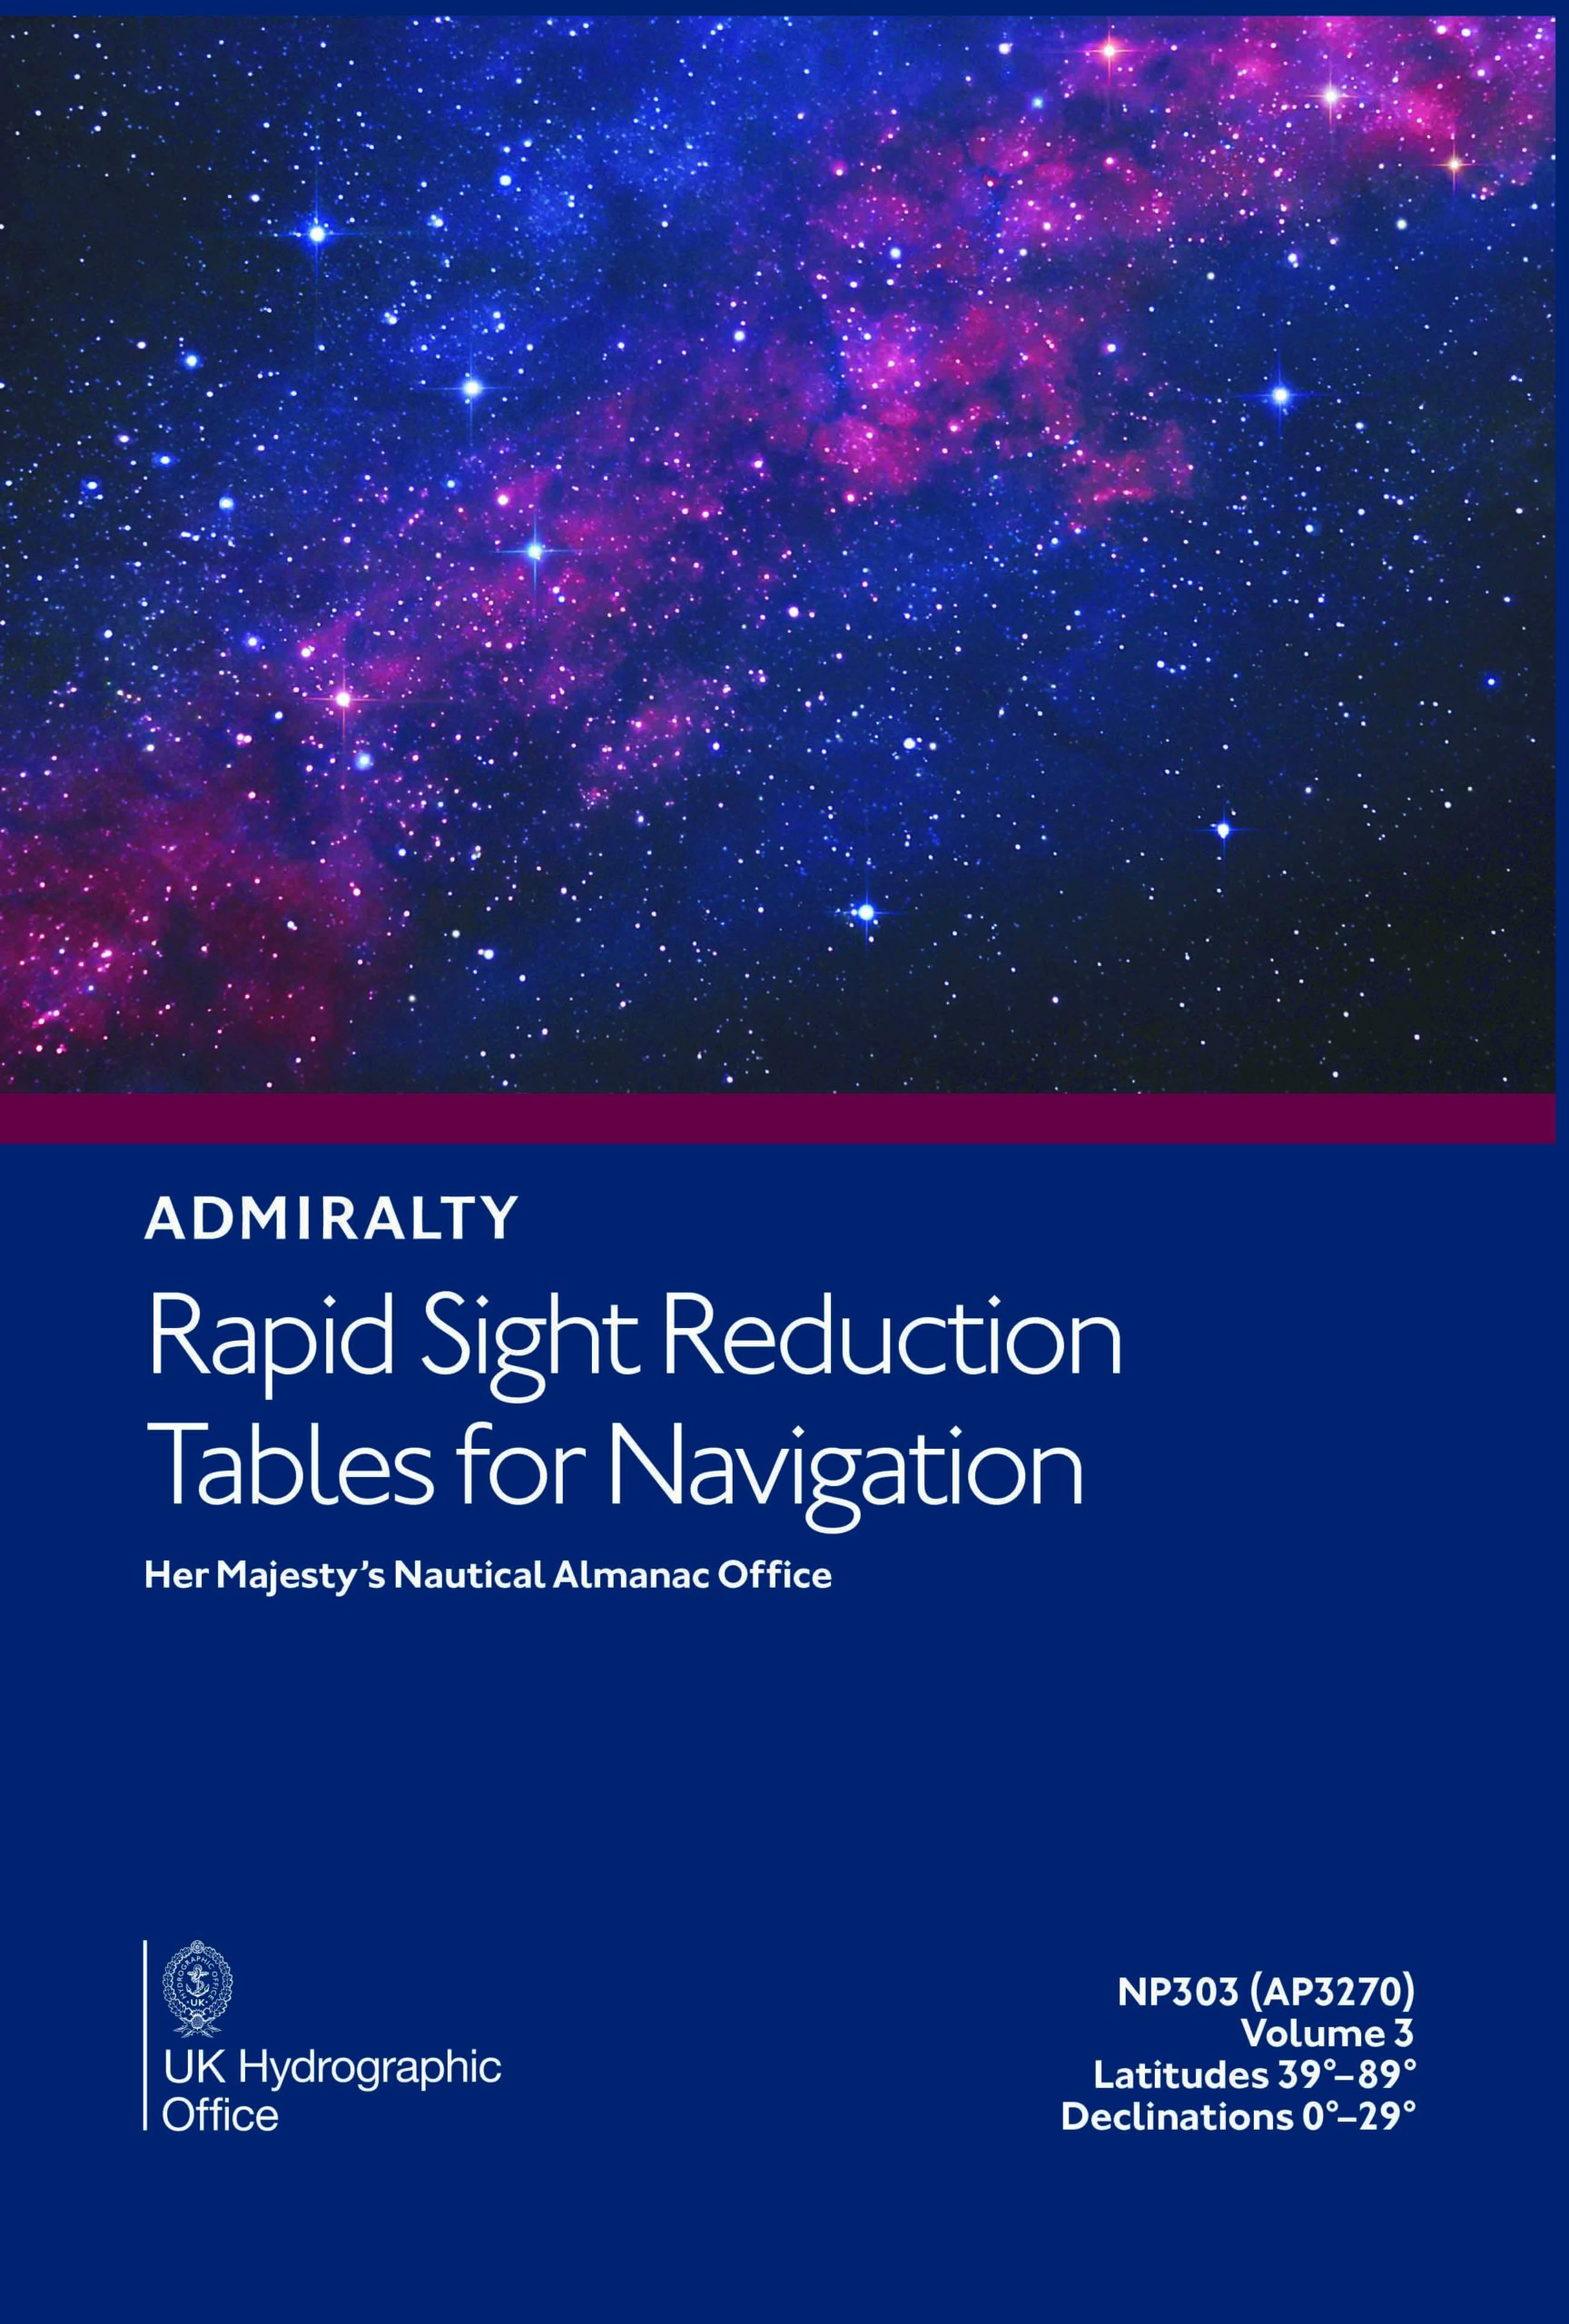 NP303 Admiralty Rapid Sight Reduction Tables for Navigation Vol 1